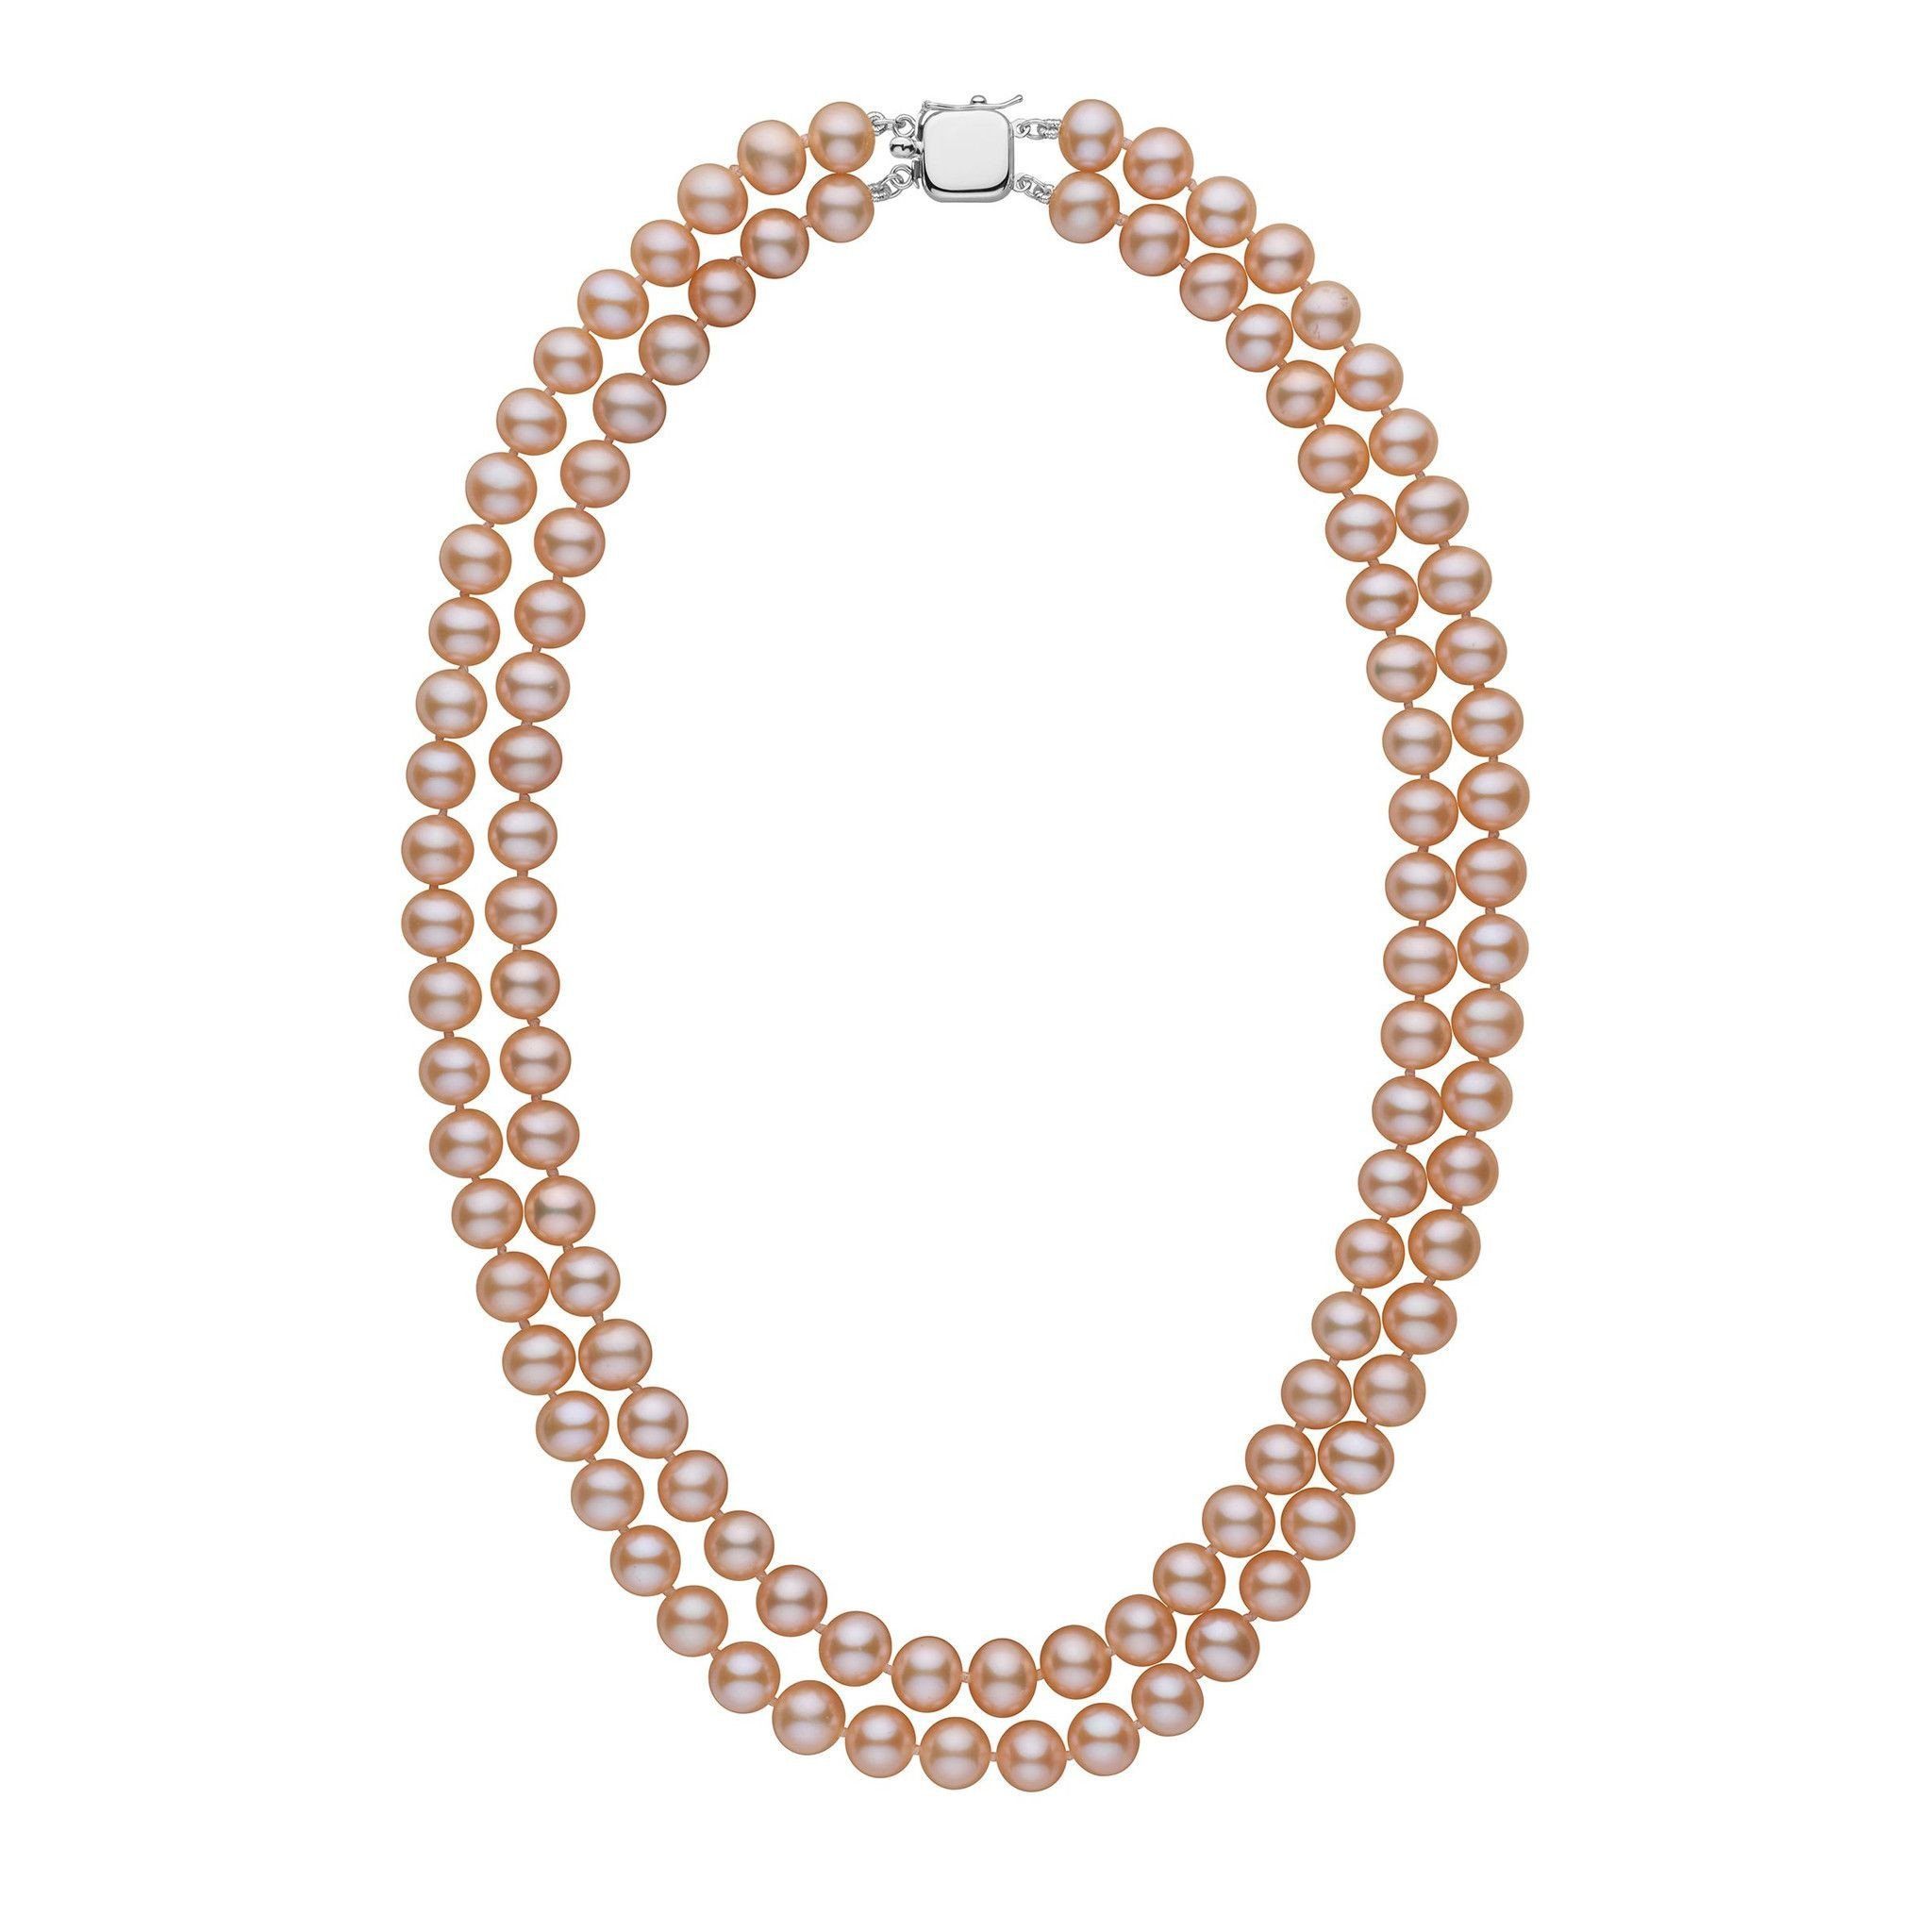 7.5-8.0 mm Double Strand AA+ Pink to Peach Freshwater Pearl Necklace